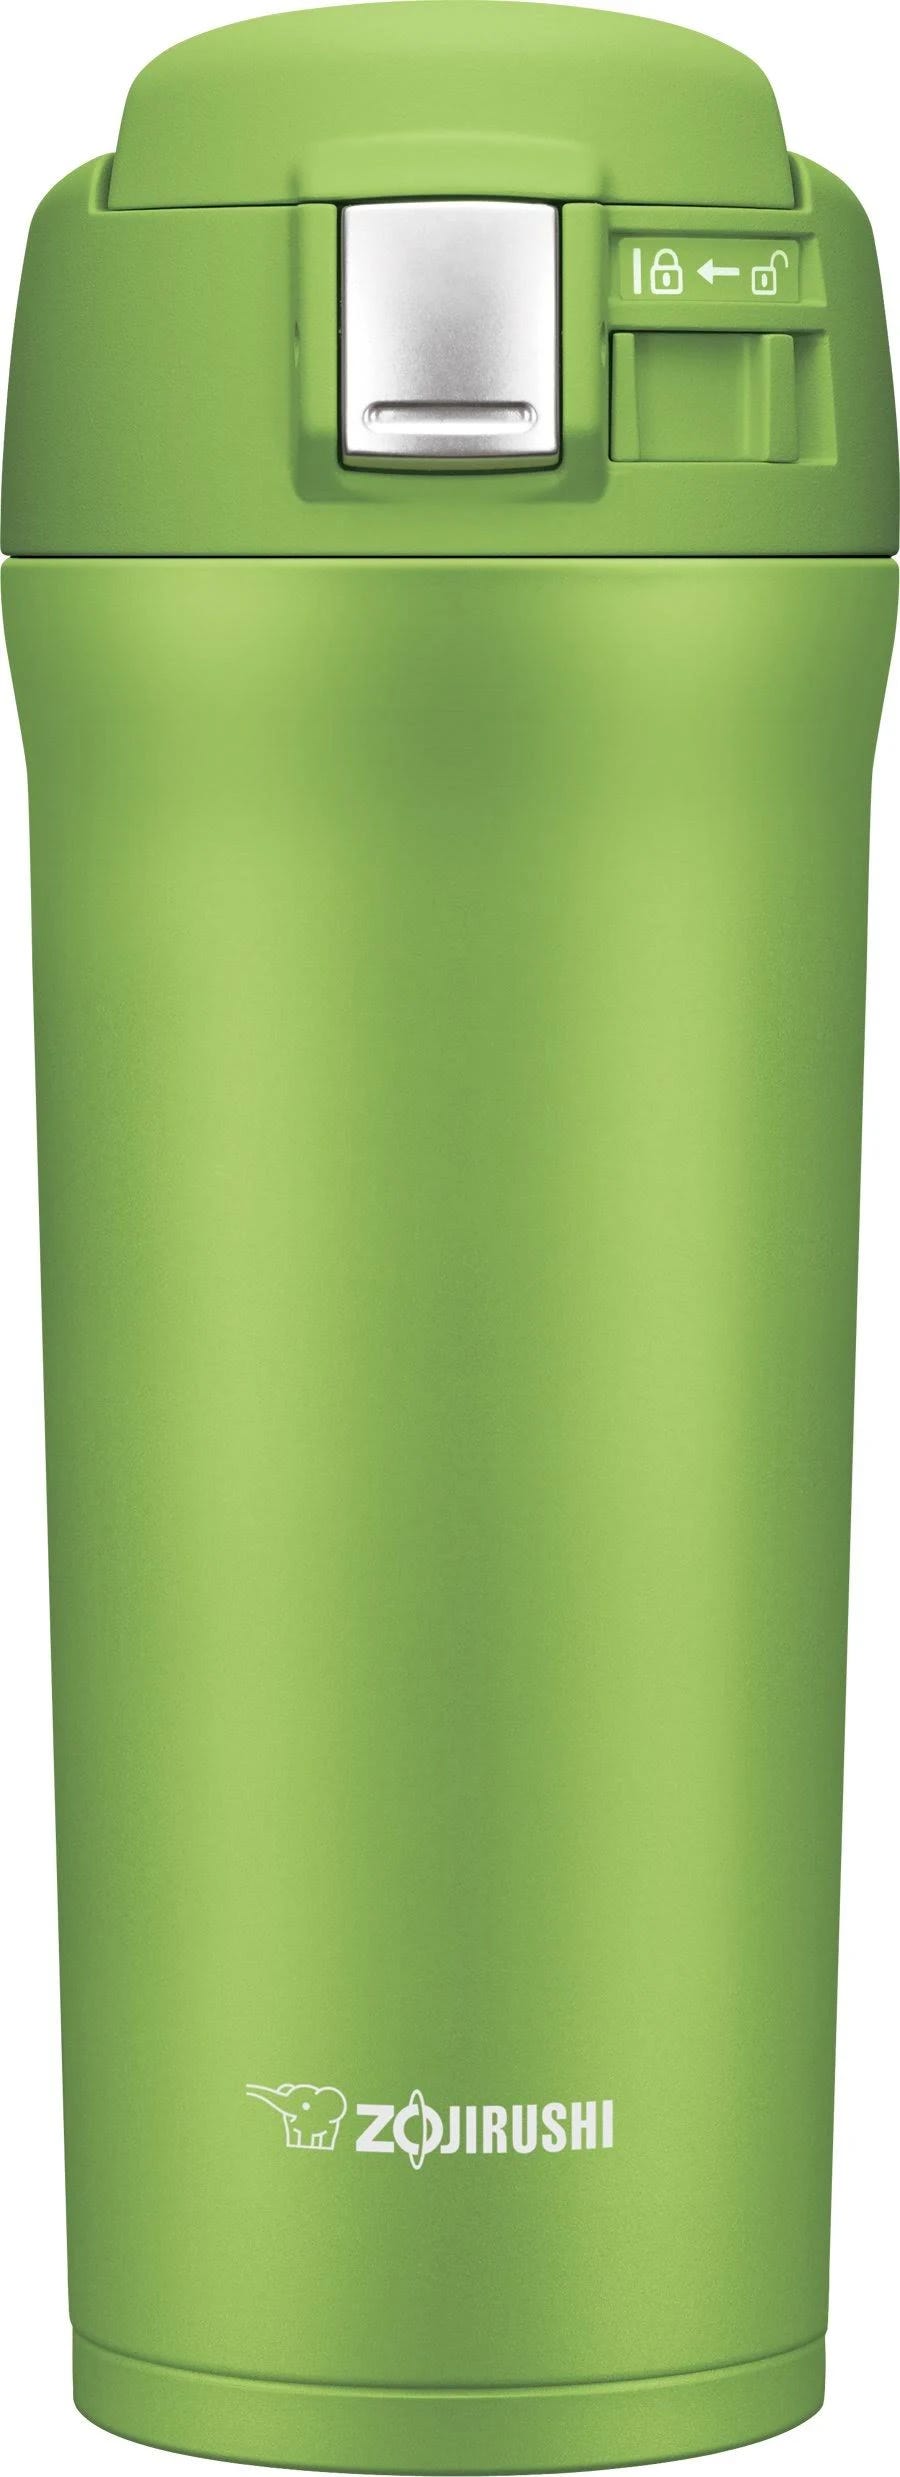 Zojirushi Stainless Steel Travel Mug: Insulated, Leak-Proof, and Compact for Hot or Cold Beverages | Image